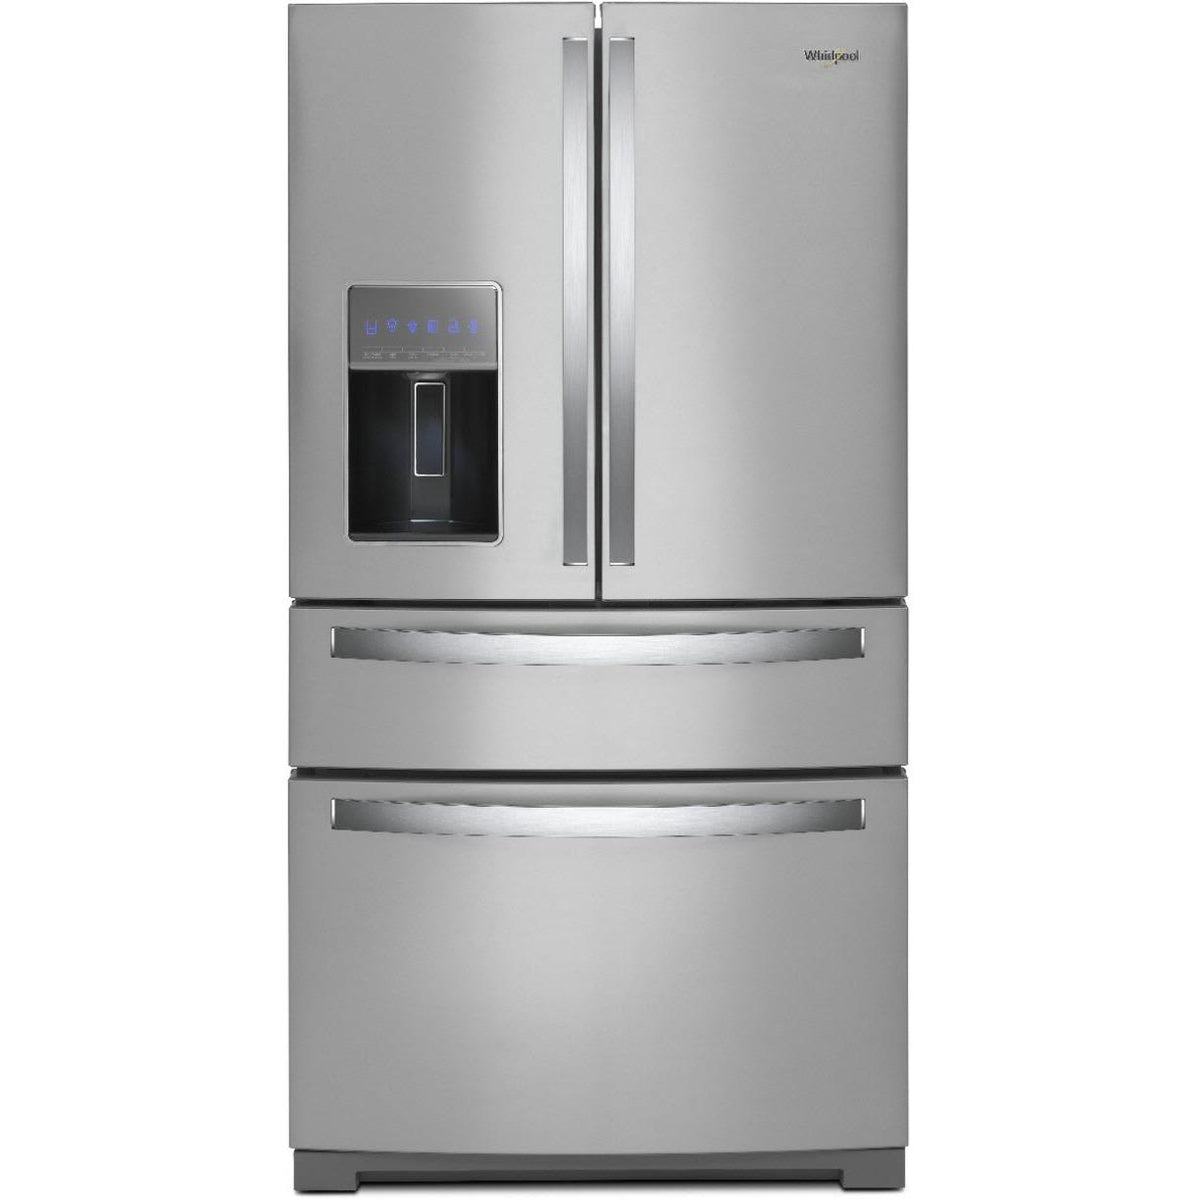 36-inch, 26.2 cu. ft. French 4-Door Refrigerator with External Water and Ice Dispensing System WRMF7736PZ IMAGE 1